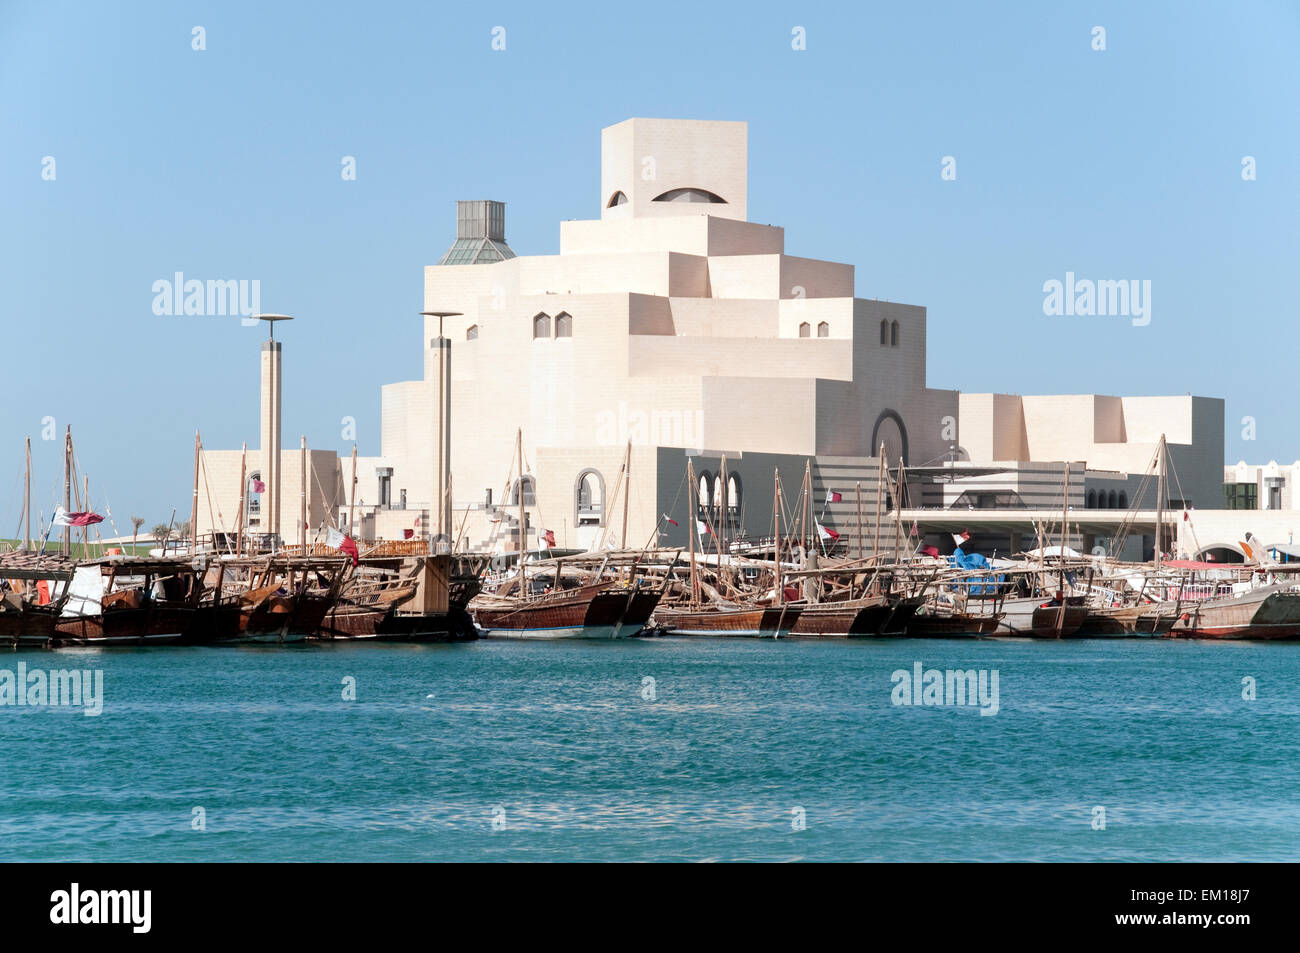 Traditional wooden dhow boats moored at a wharf in front of the Museum of Islamic Art in Doha, Qatar. Stock Photo